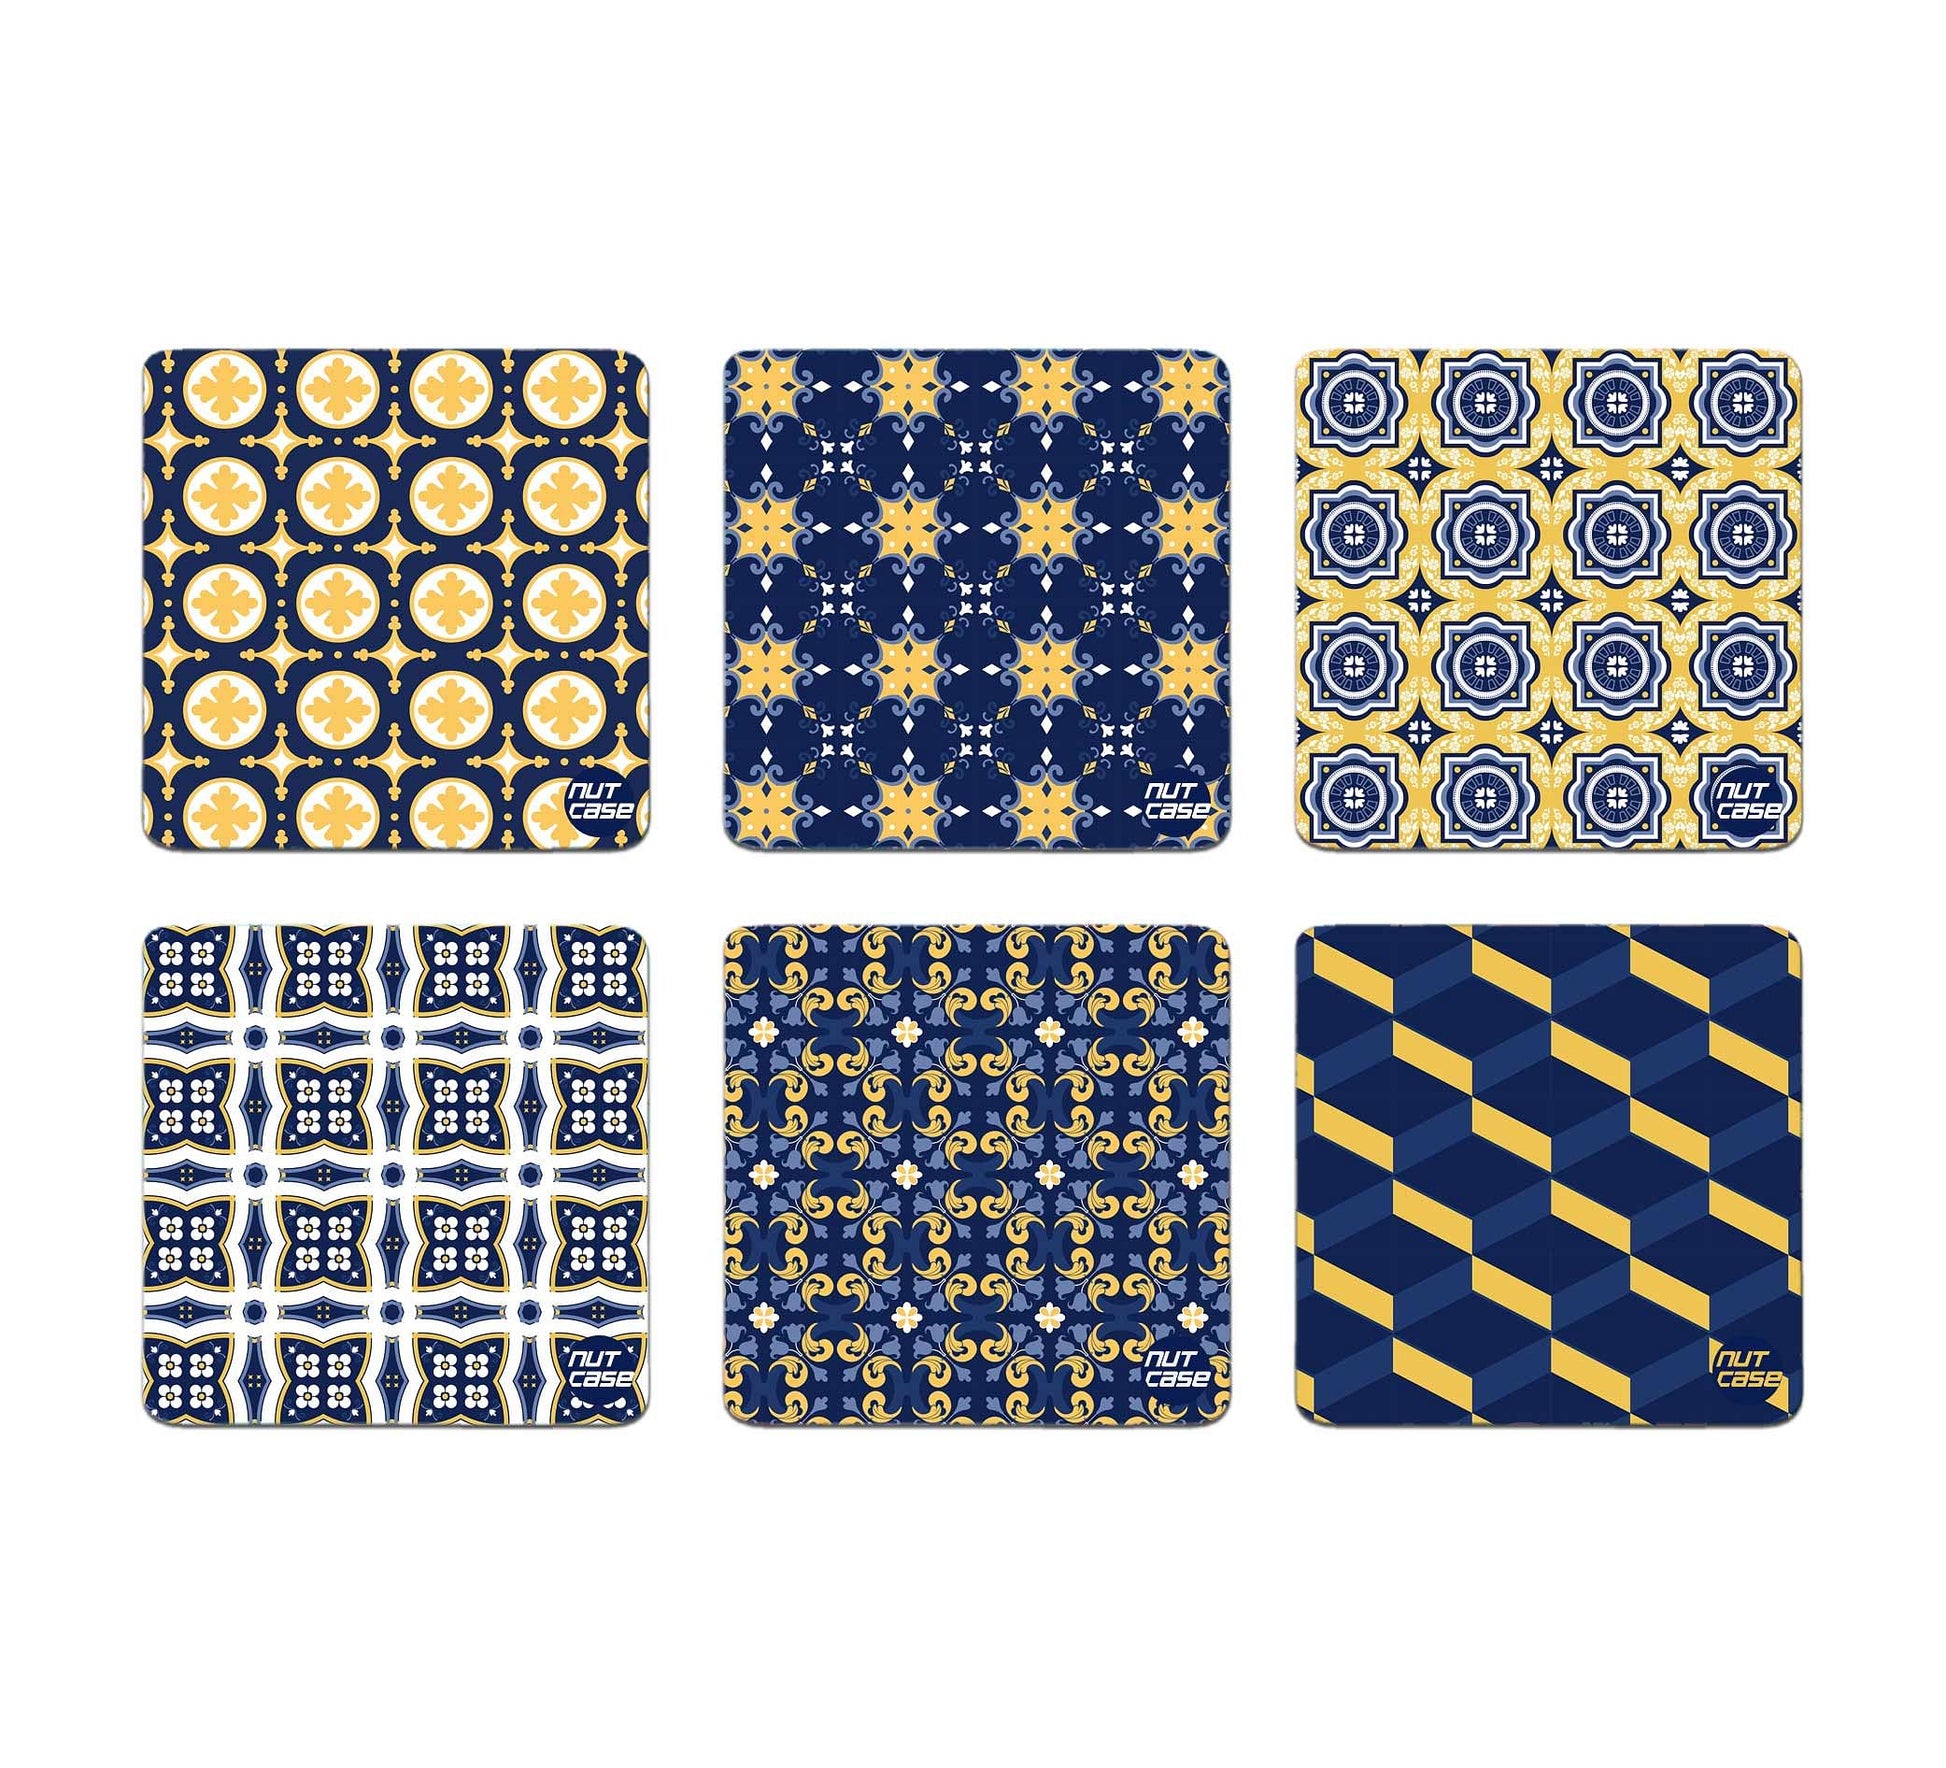 Metal Cool Coffee Coasters Pack of 6 for Dining Table - Spanish Tiles Nutcase